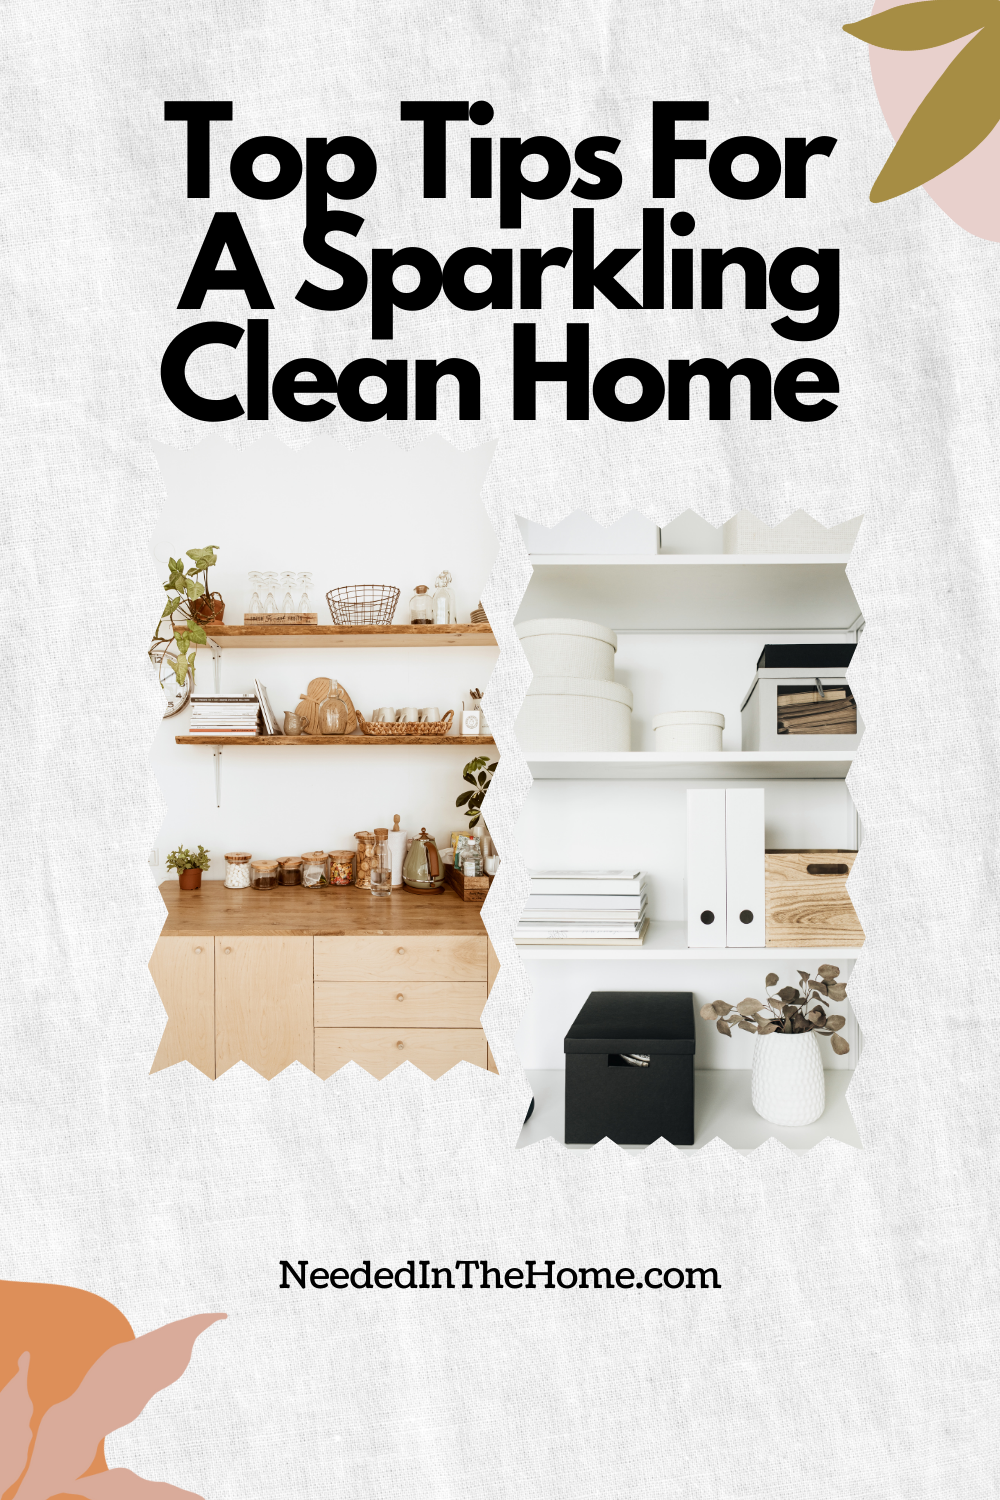 pinterest-pin-description top tips for a sparkling clean home clean counters shelves neededinthehome